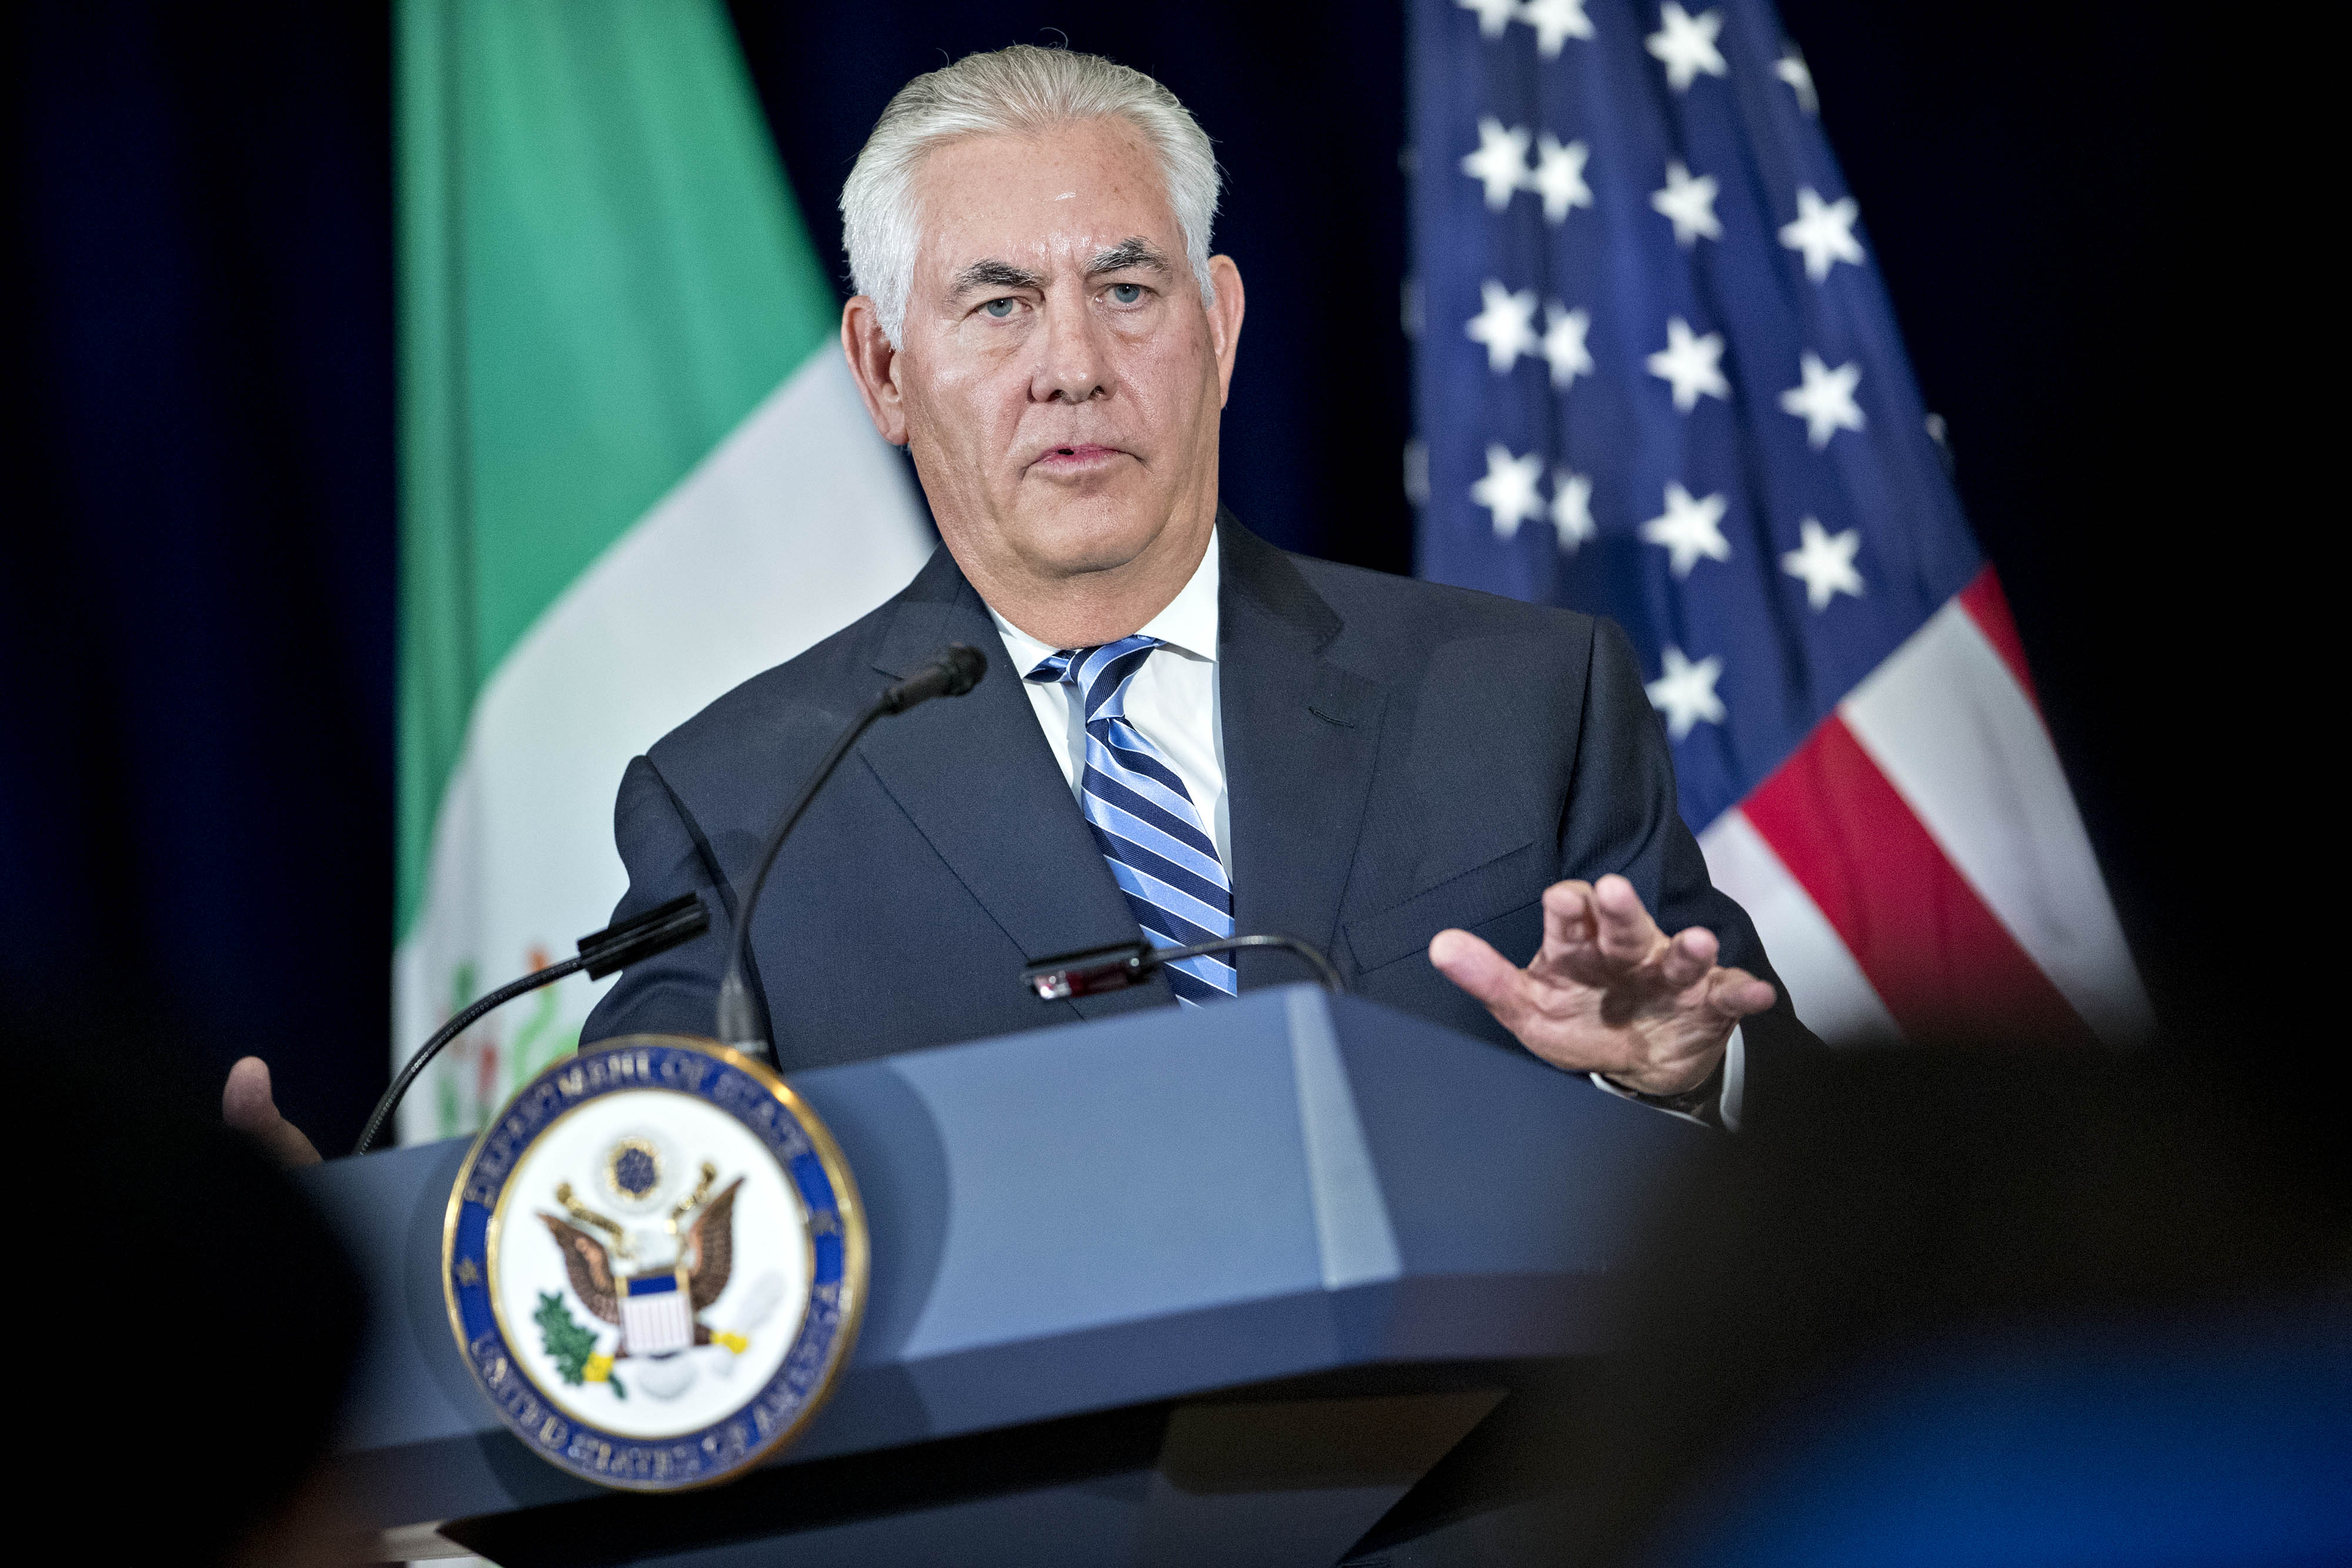 Secretary Tillerson Holds Strategic Dialogue On Disrupting Transnational Criminal Organizations With Mexico's Videgaray